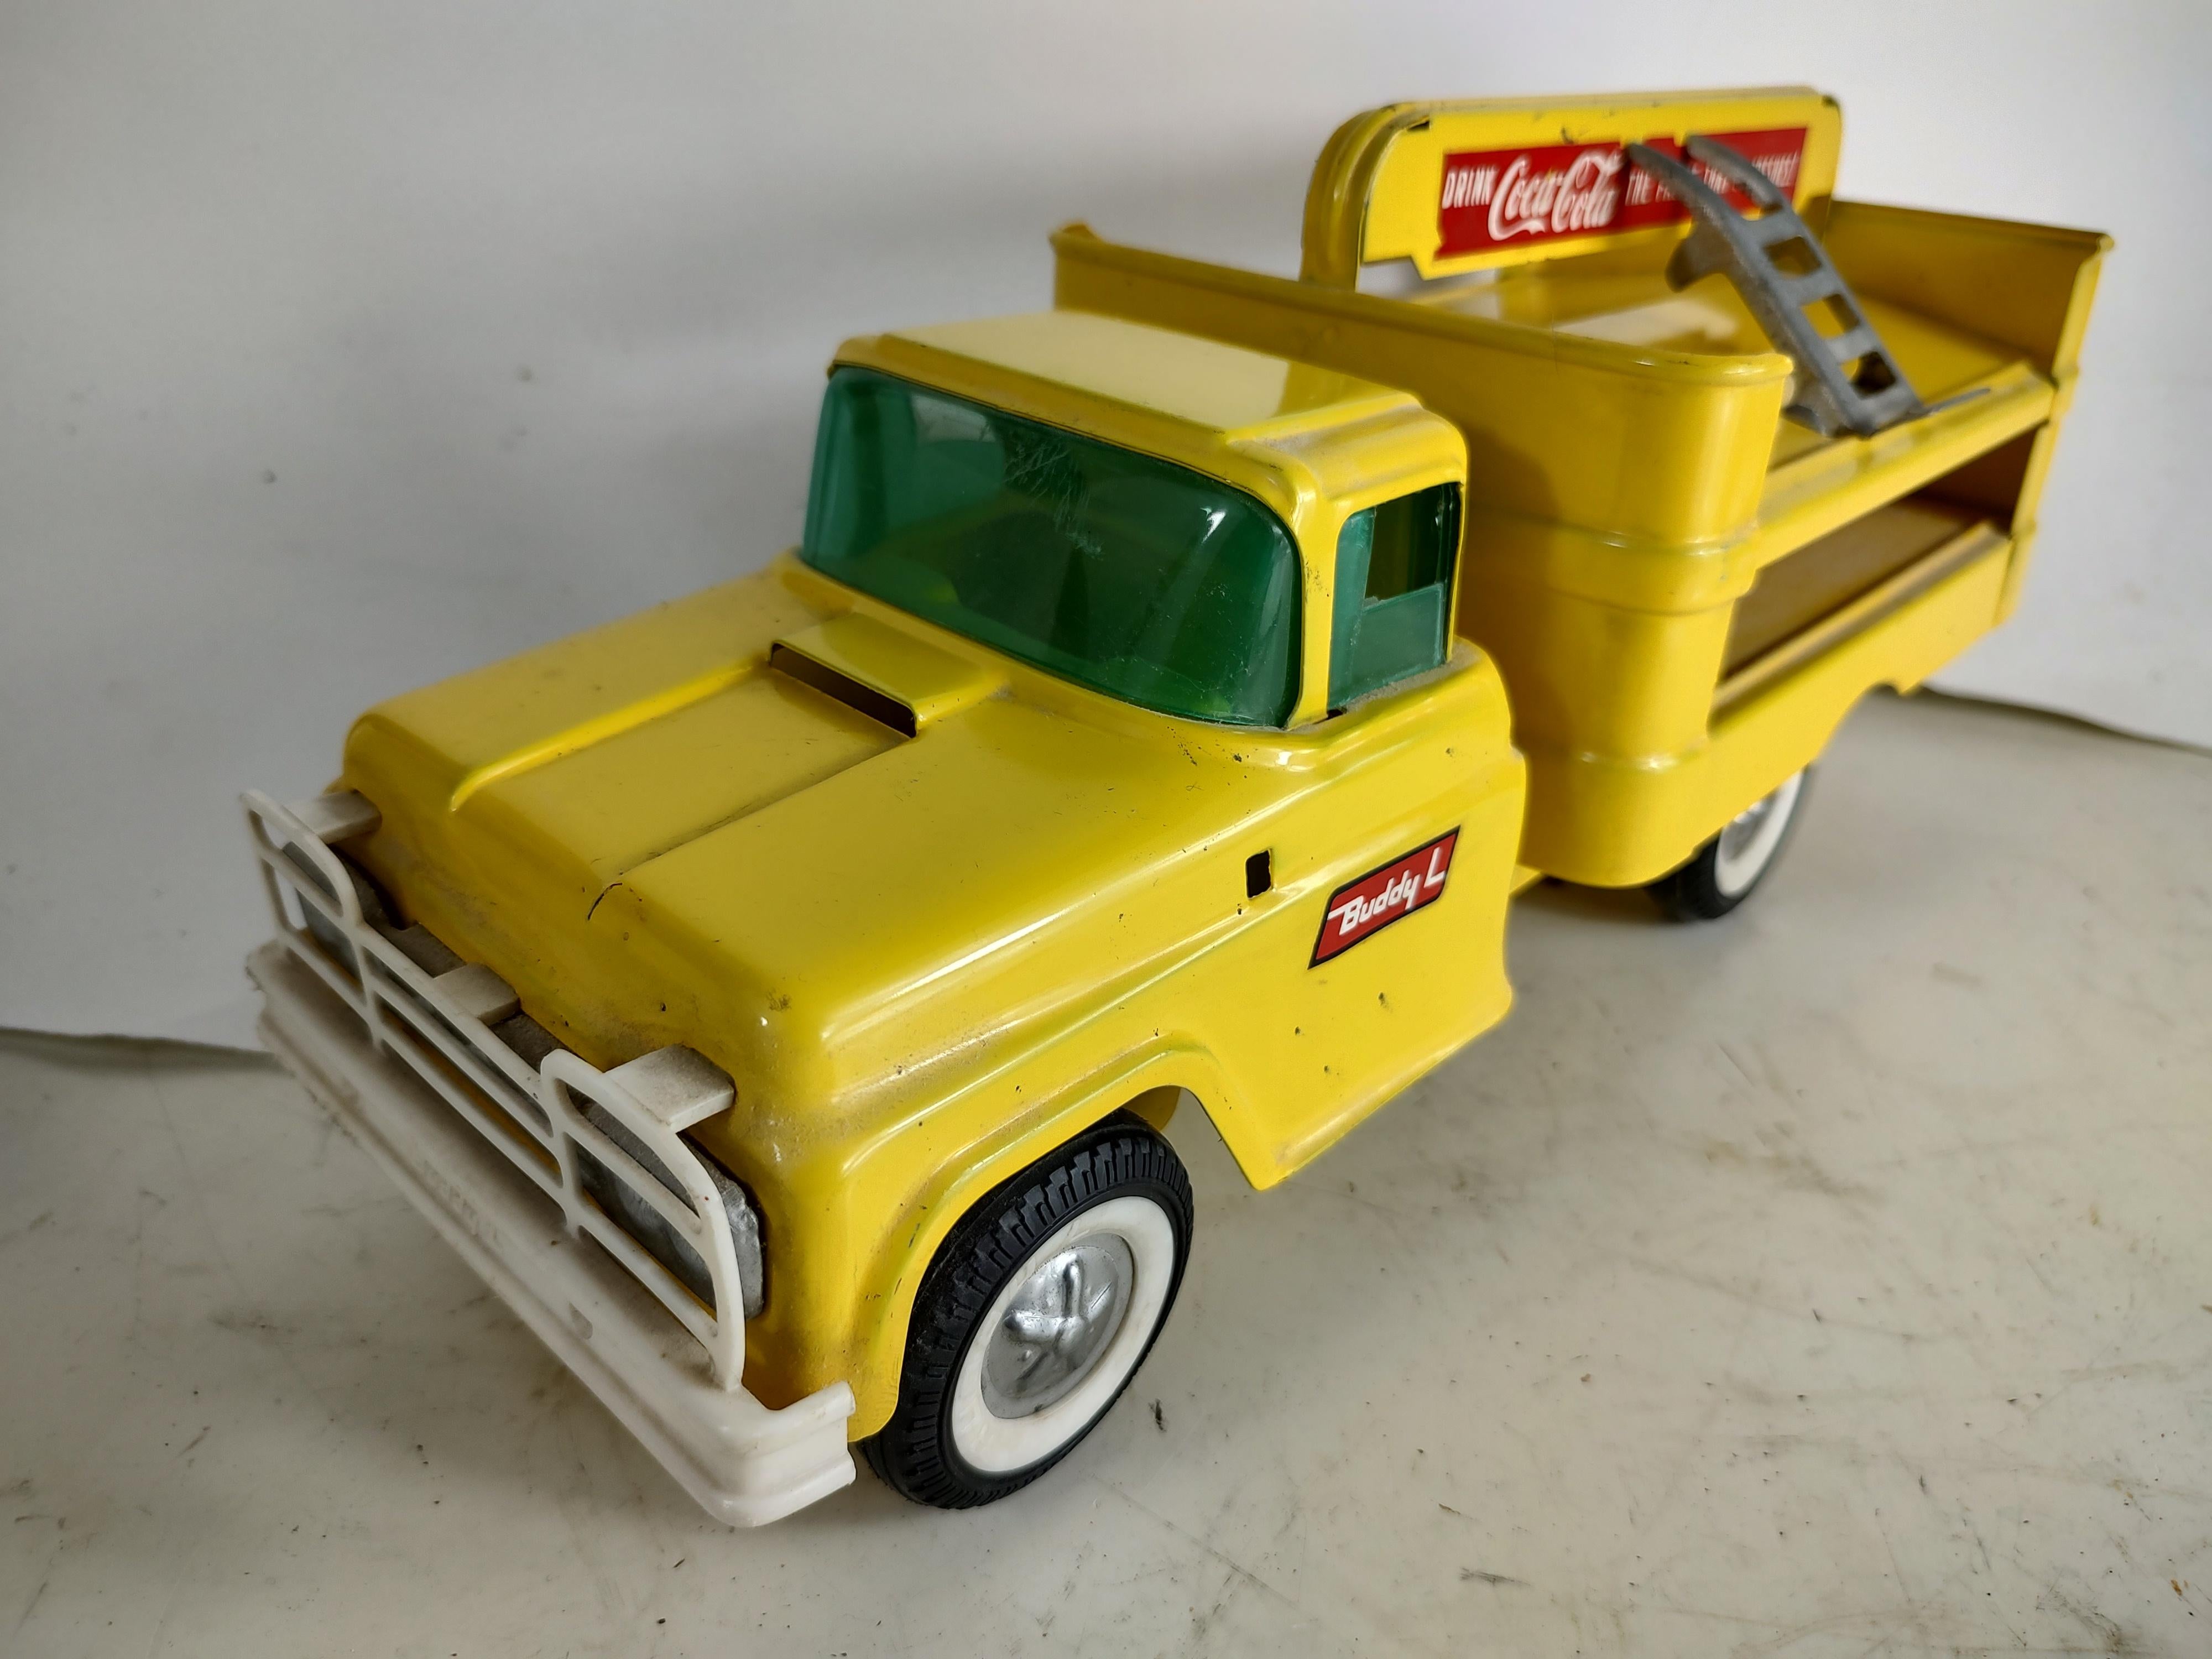 Mid Century Toy Coca Cola Delivery Truck by Buddy L 1